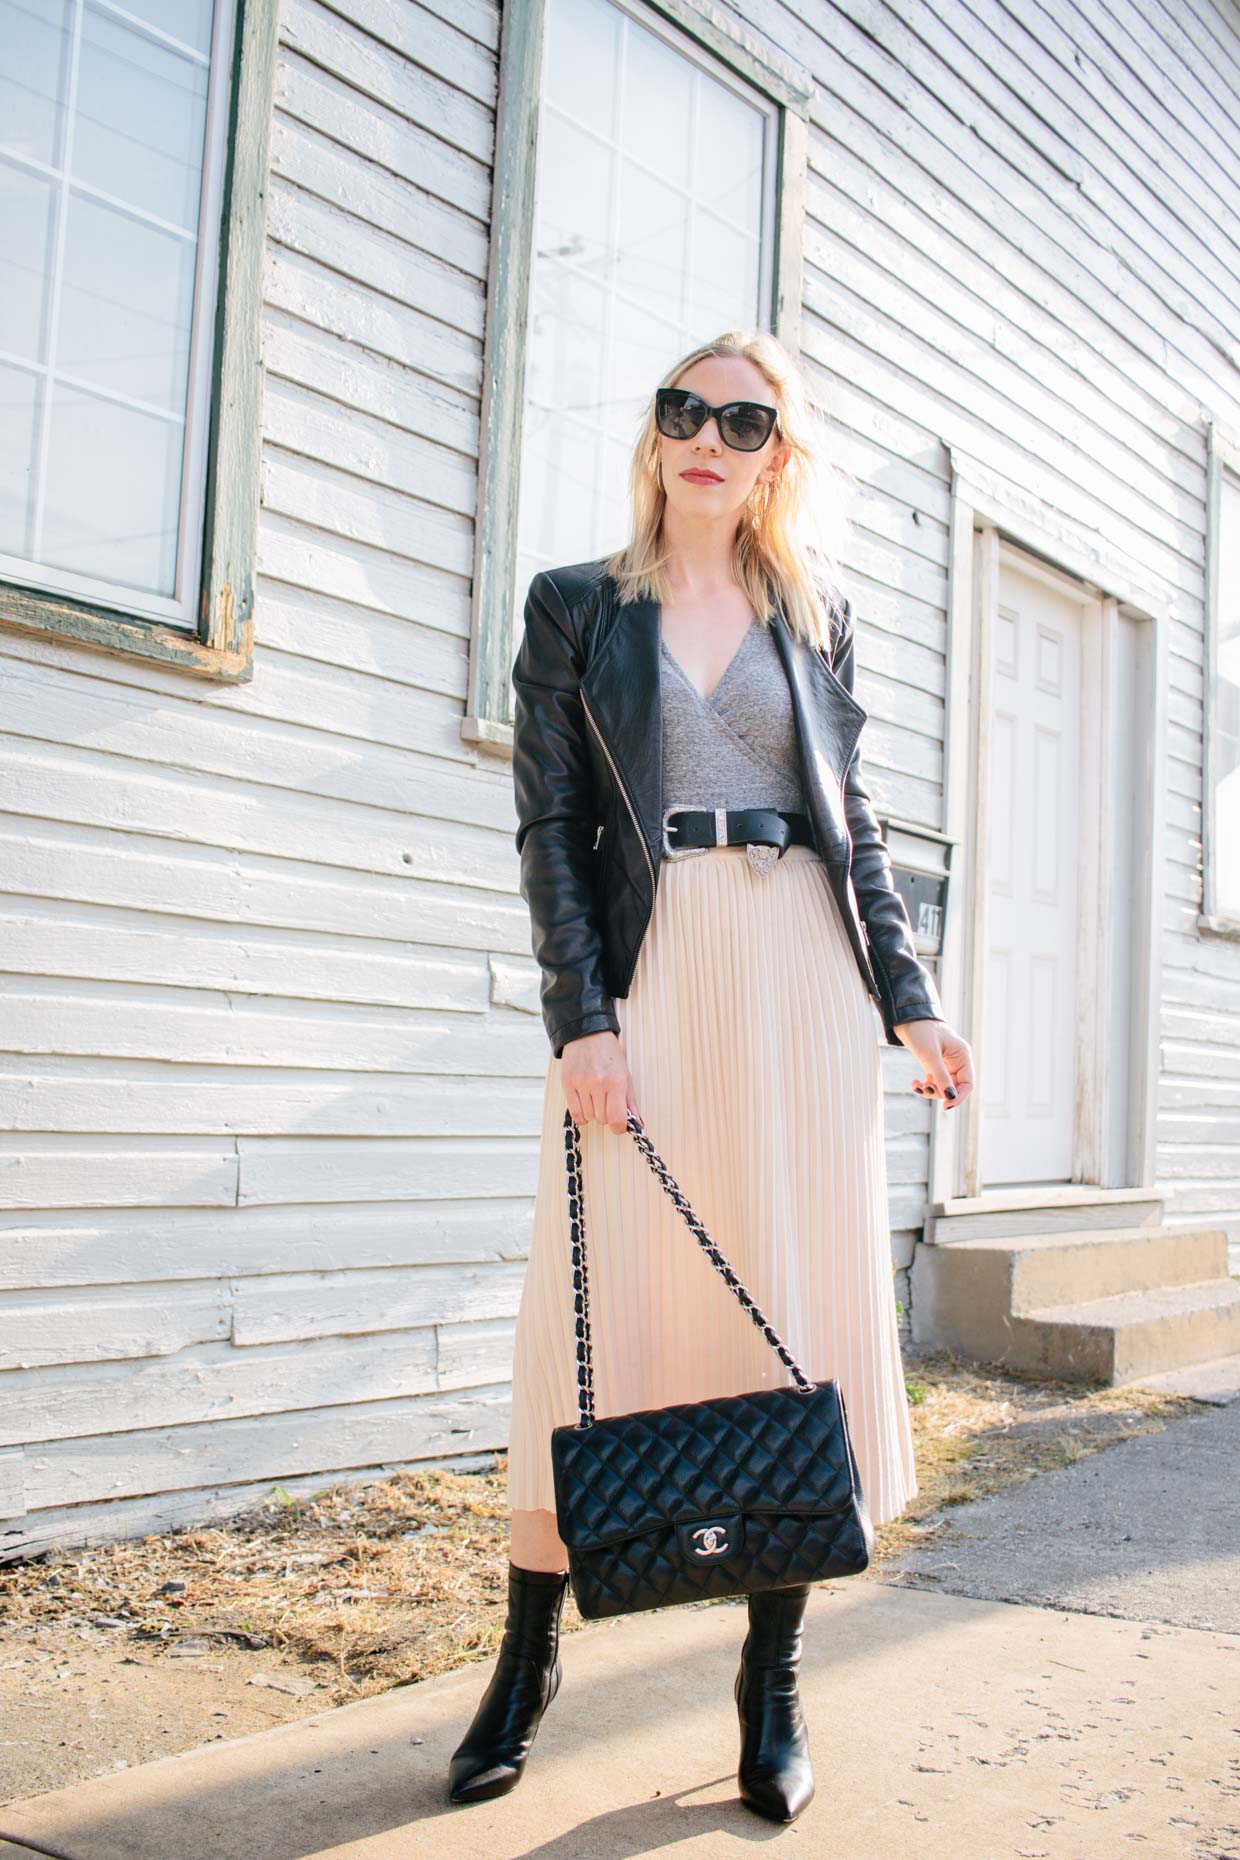 My Favorite Way to Style a Pleated Midi Skirt